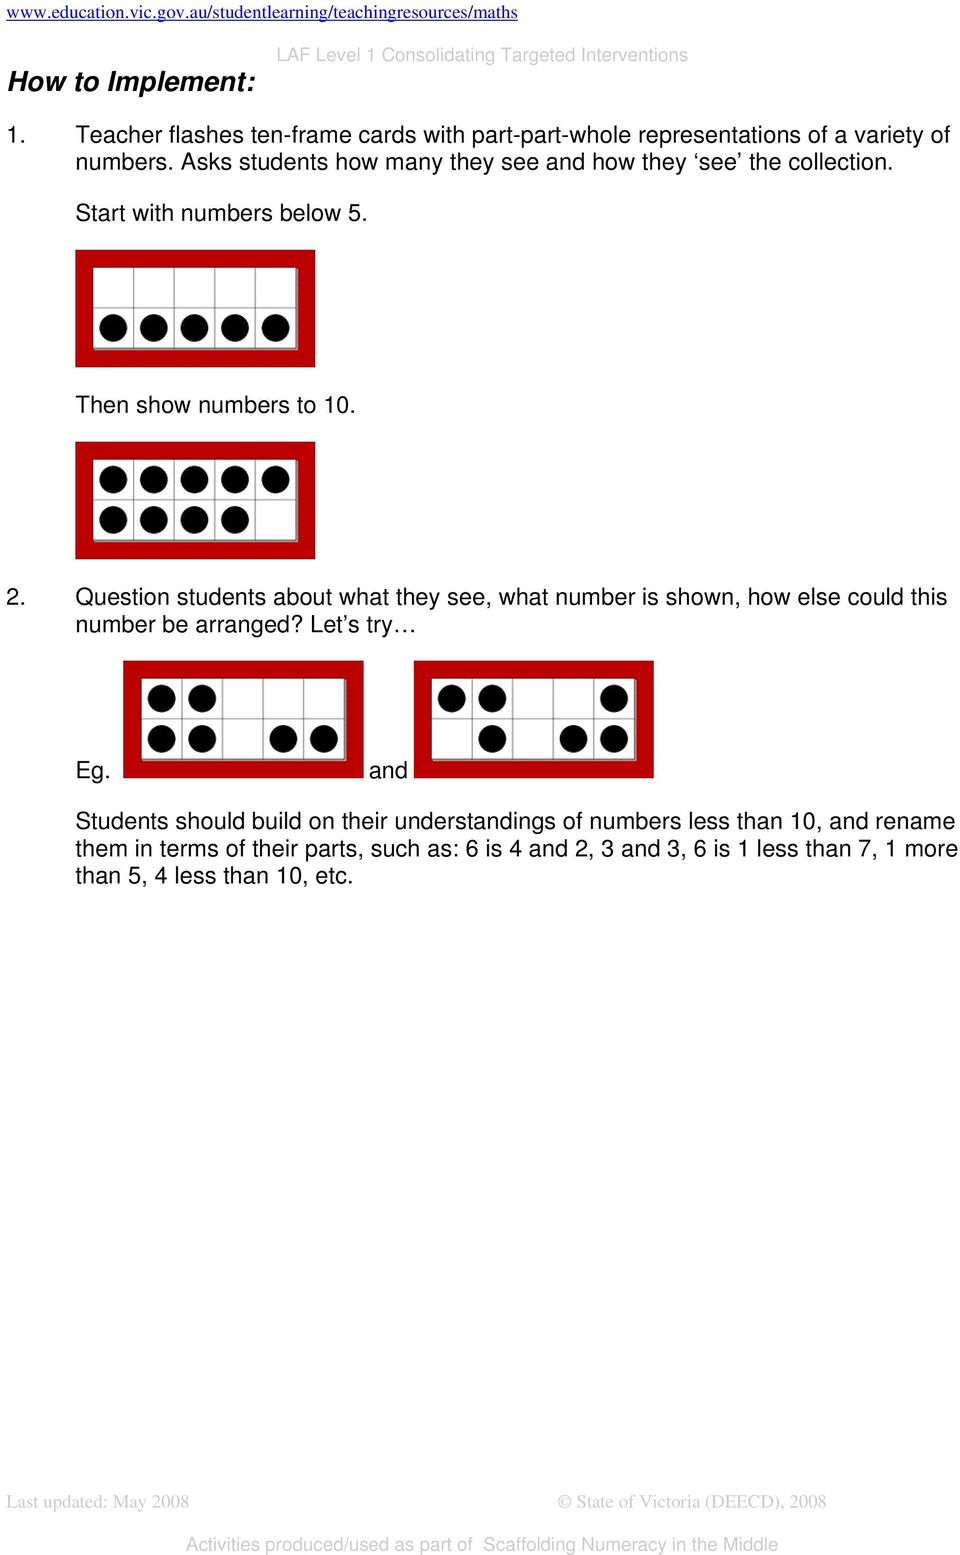 Question students about what they see, what number is shown, how else could this number be arranged? Let s try Eg.